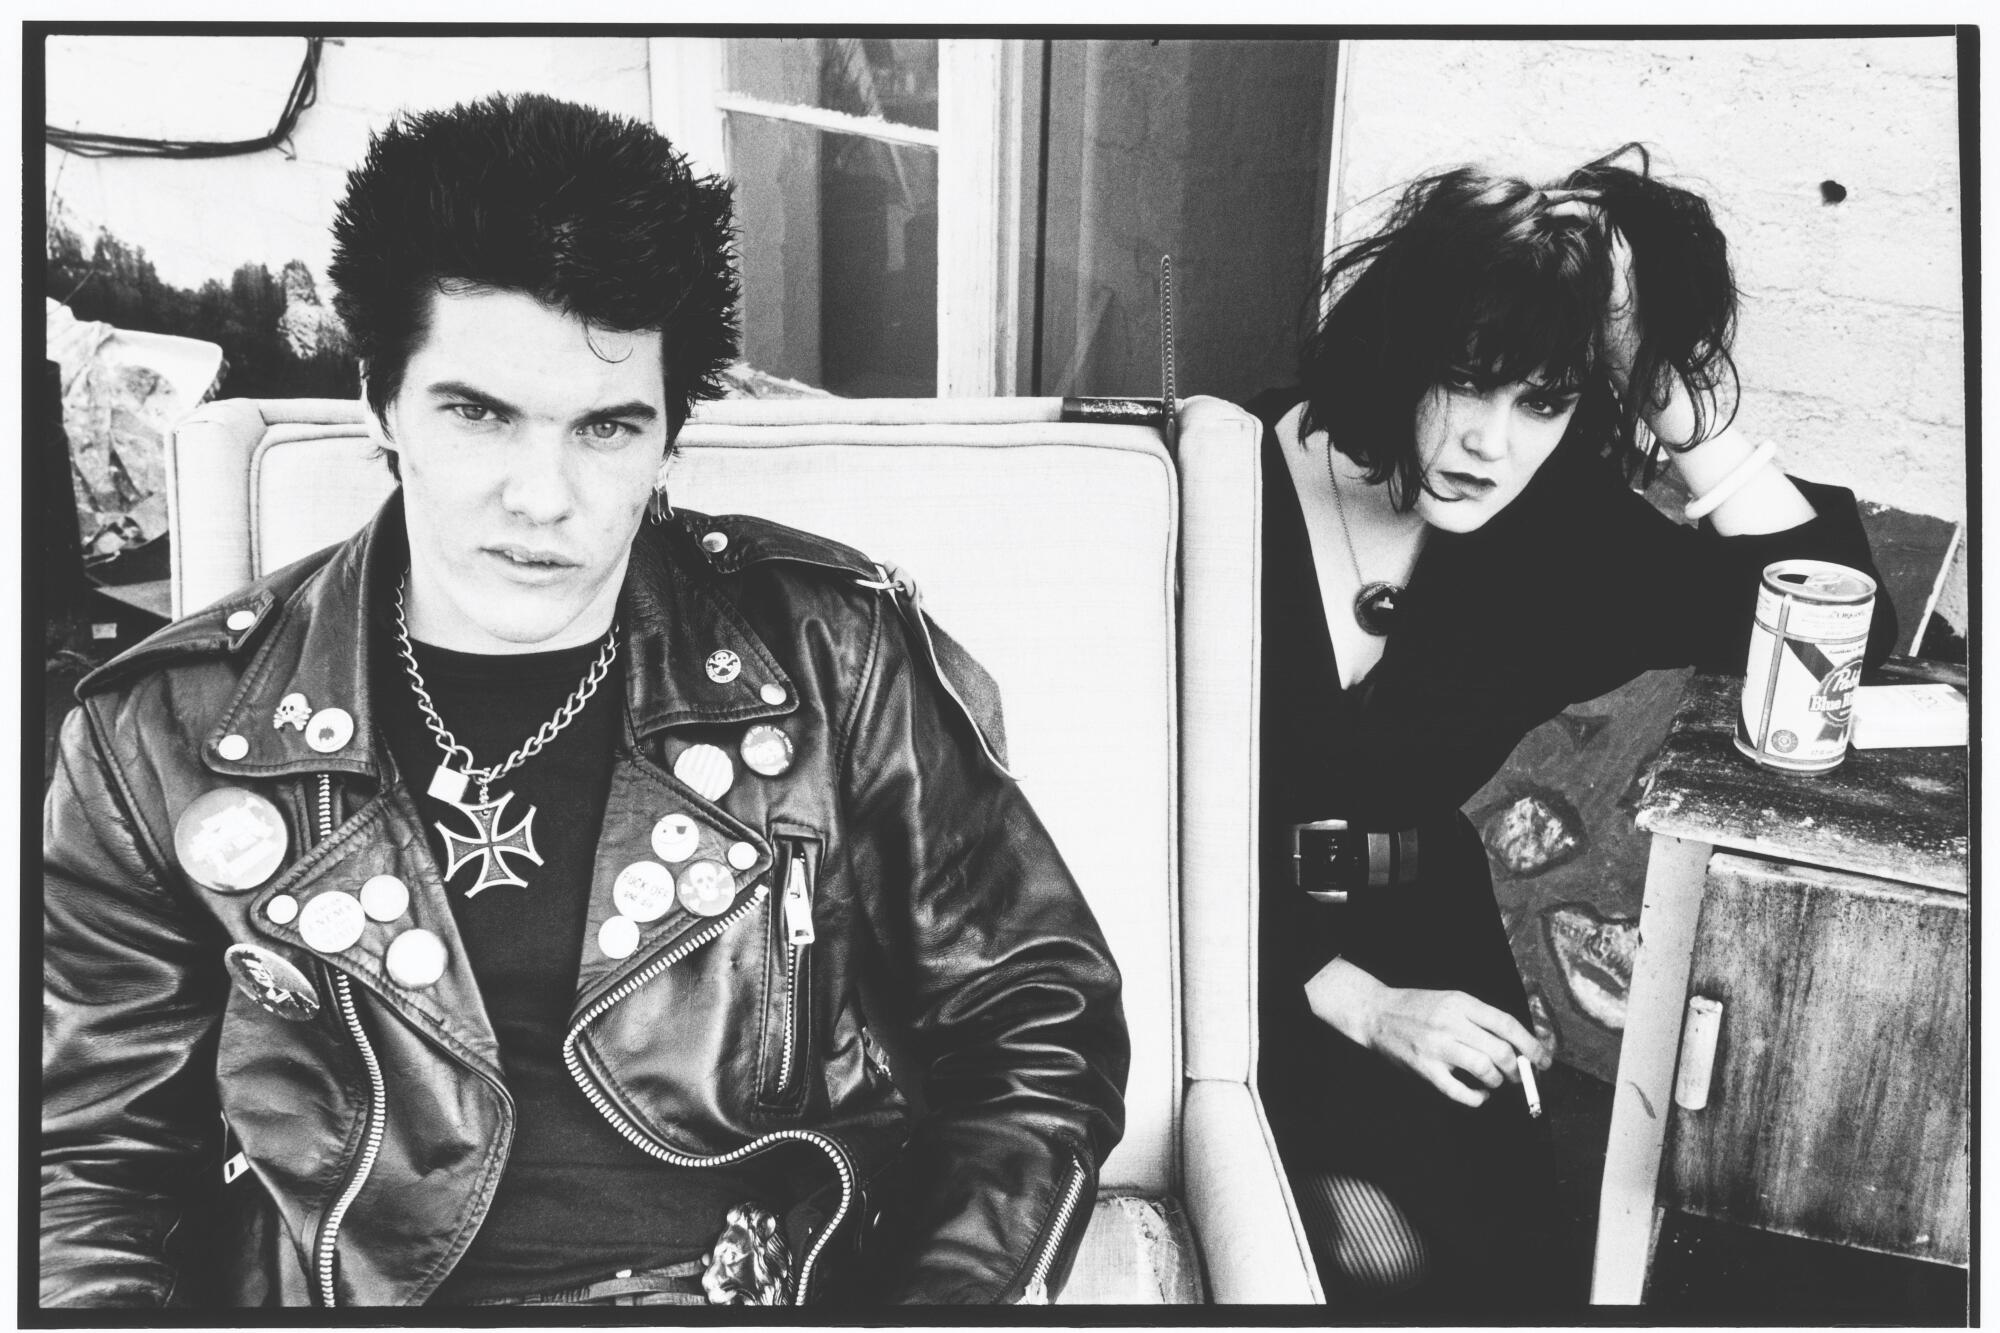 Darby Crash of the Germs and Exene Cervenka of X, on a Hollywood rooftop around the year L.A. punk broke.